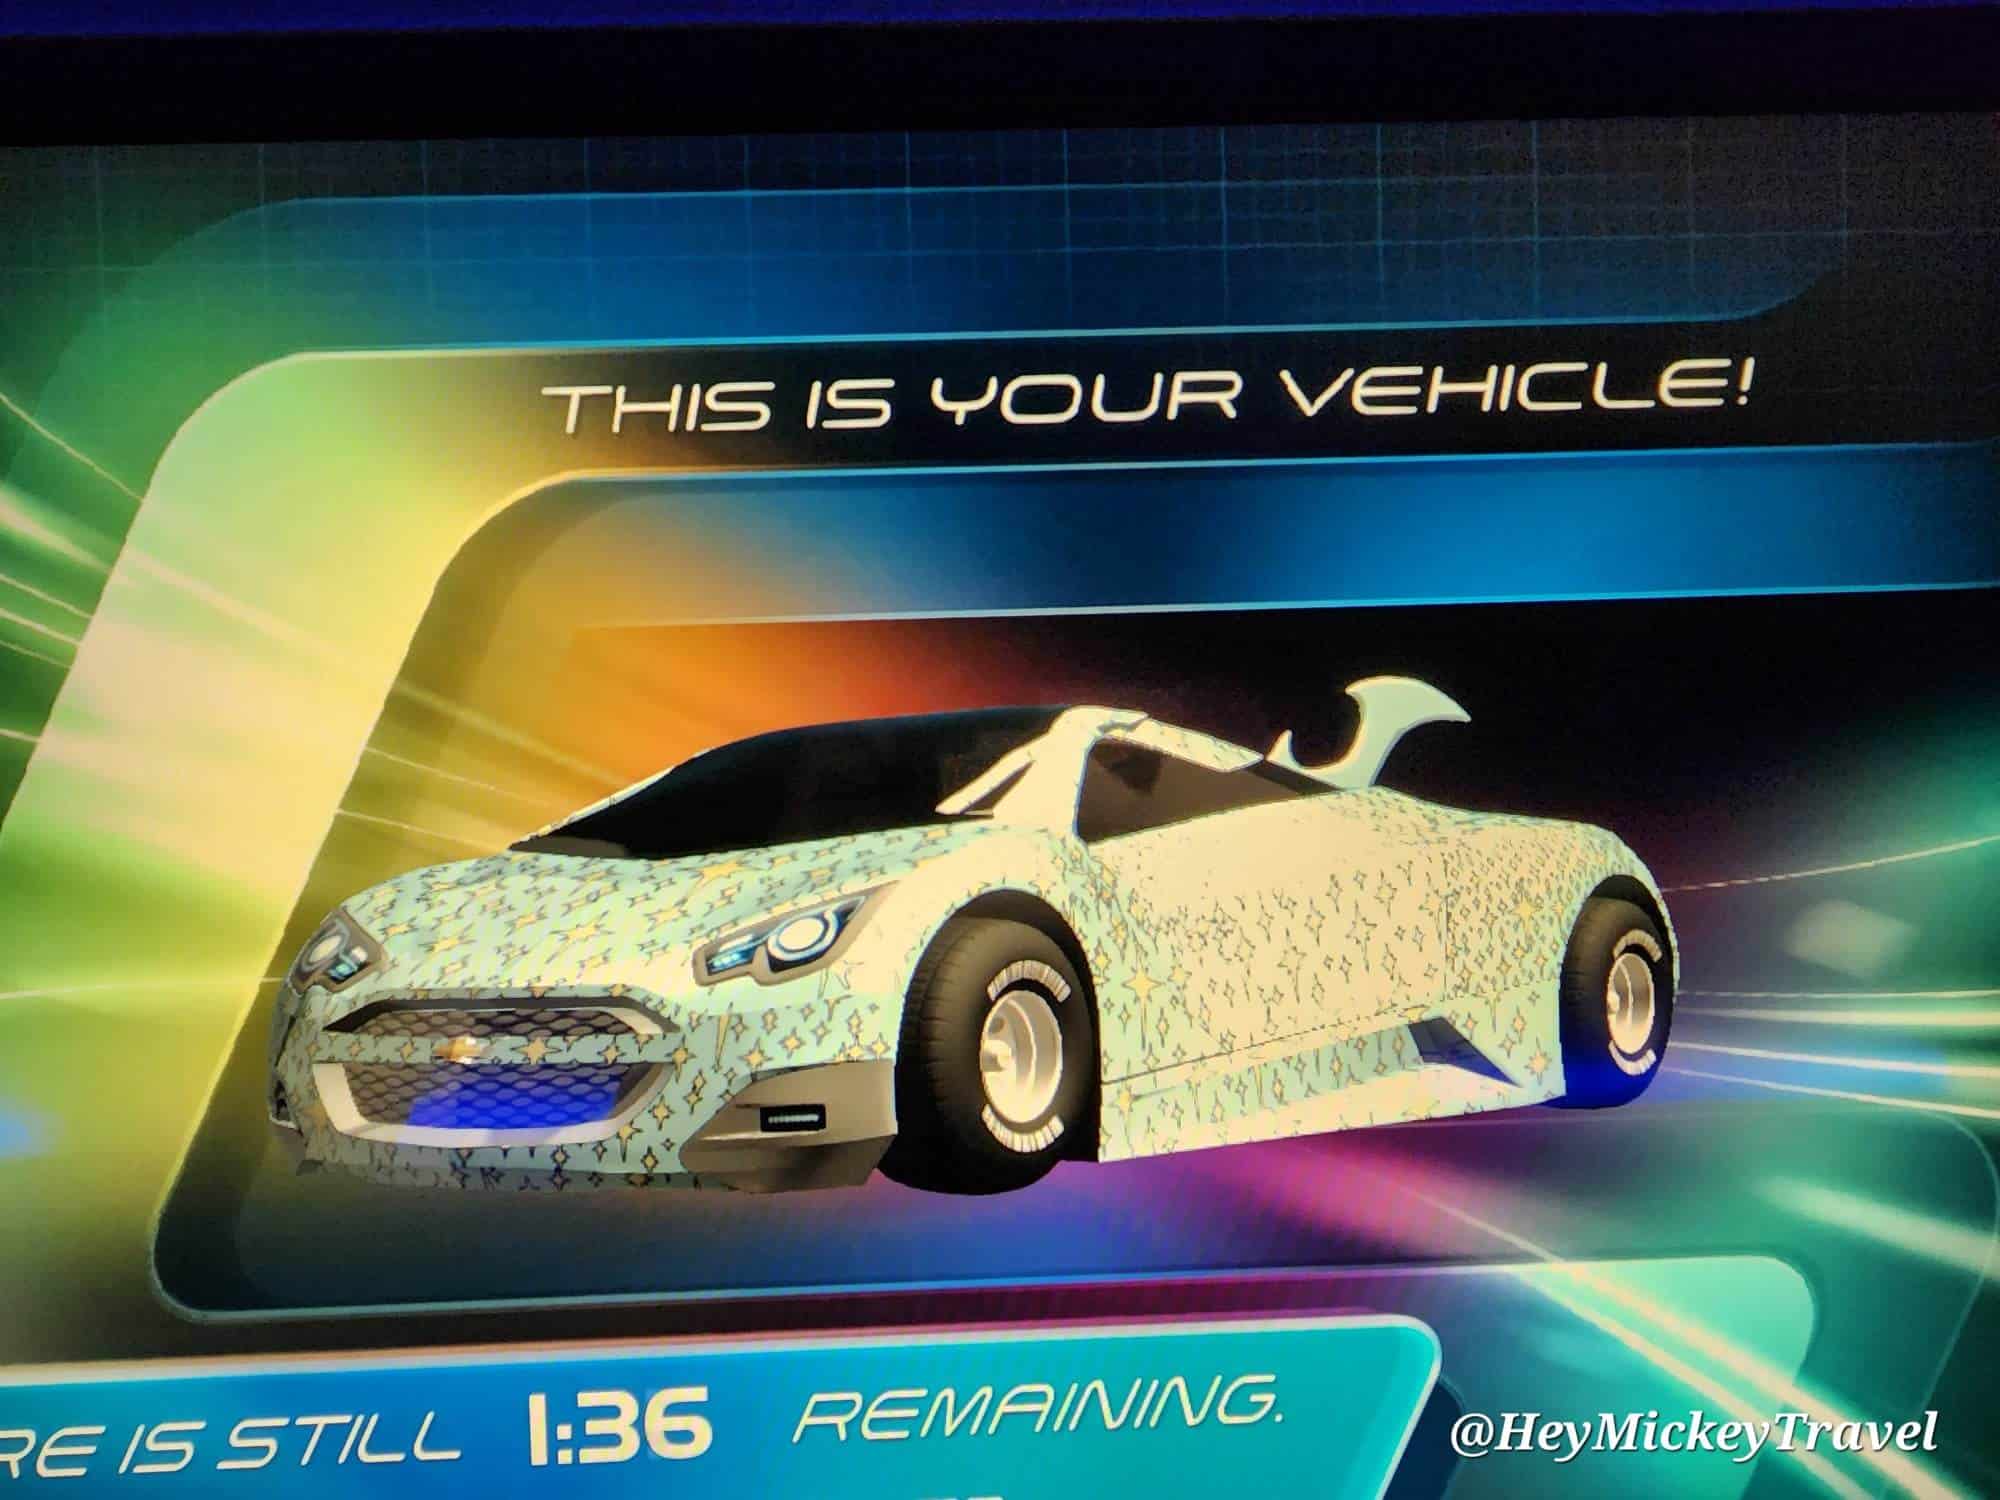 Create your own vehicle and then race around the Test Track in this fastest ride at Disney World.